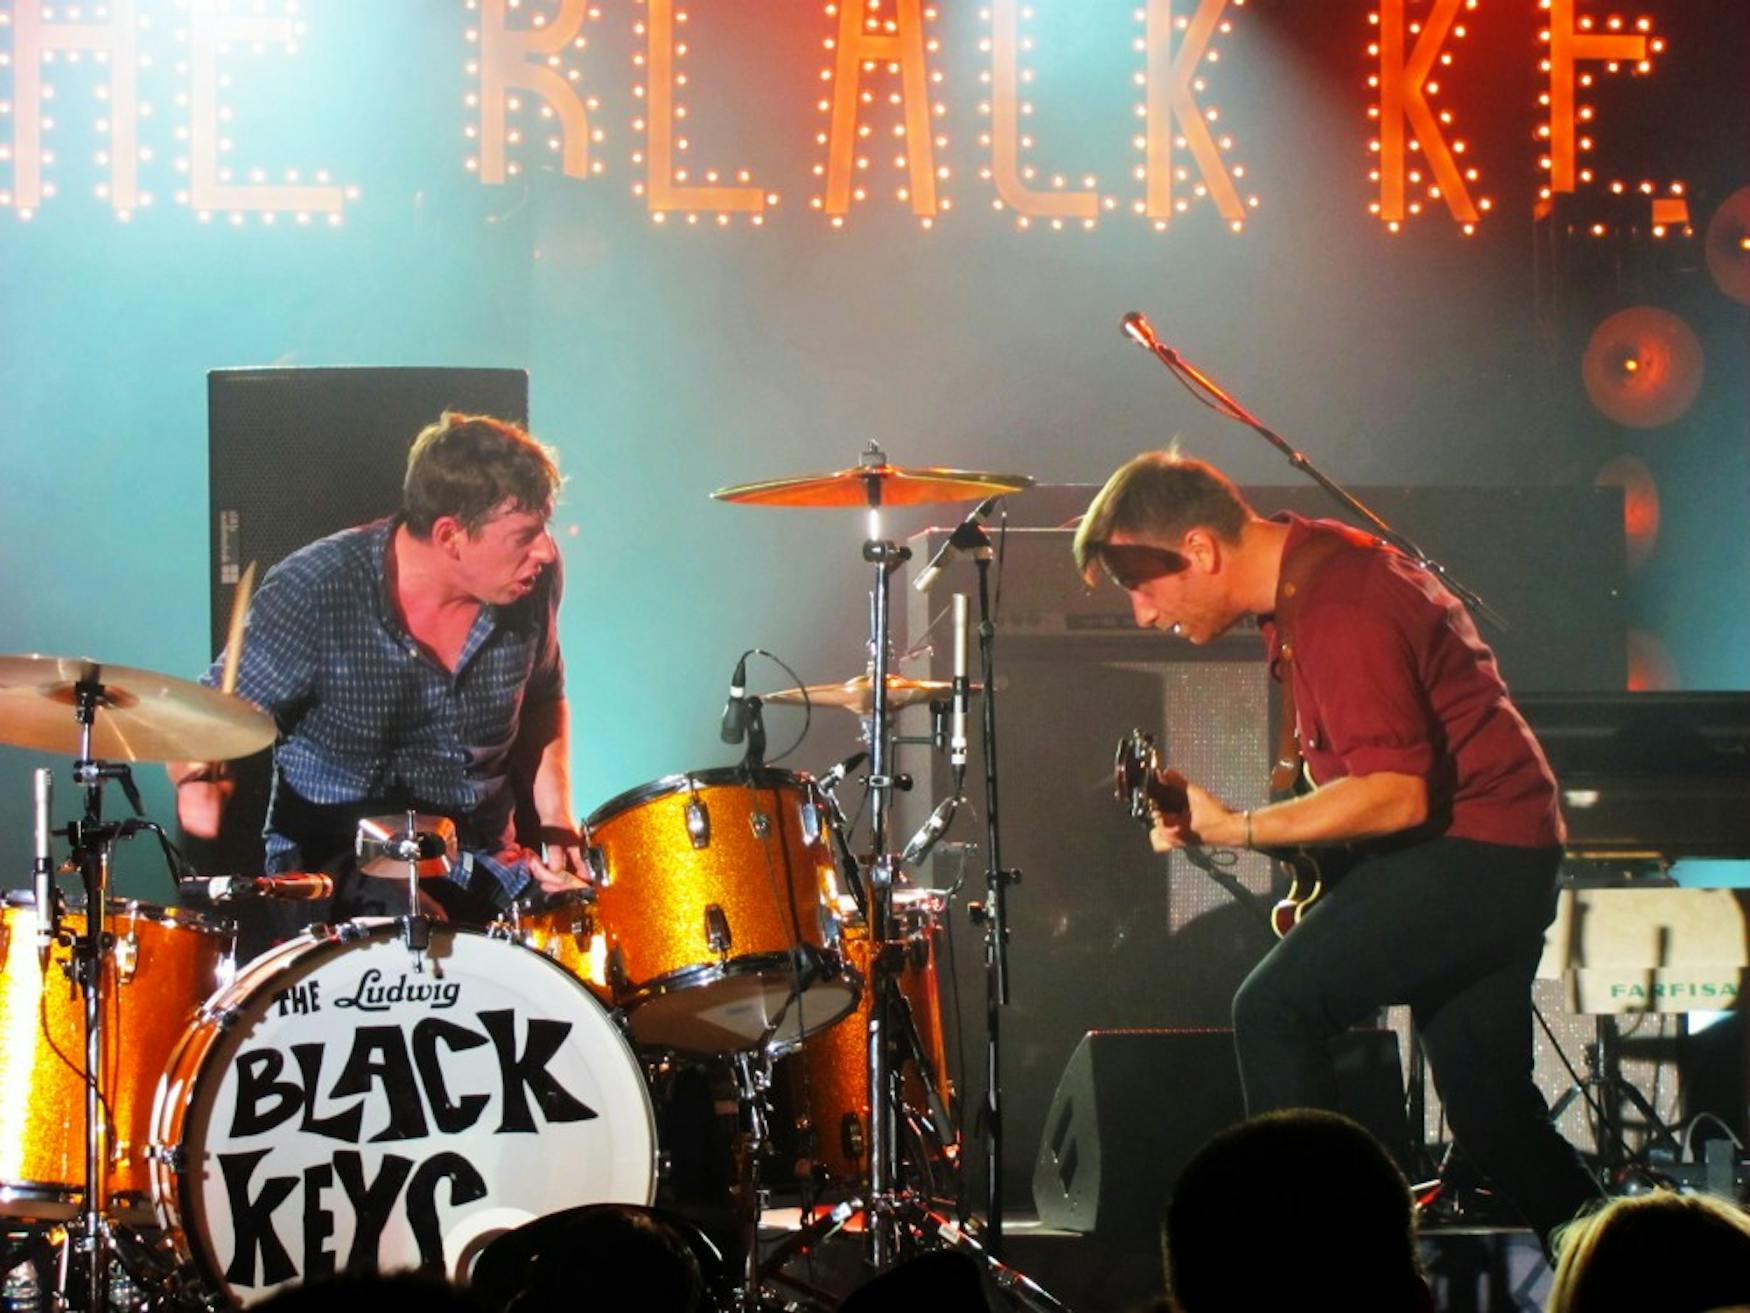 UNLOCKING ROCK: On Sunday night, the Black Keys, pictured here, accompanied by Cage the Elephant, performed at TD Garden in Boston.